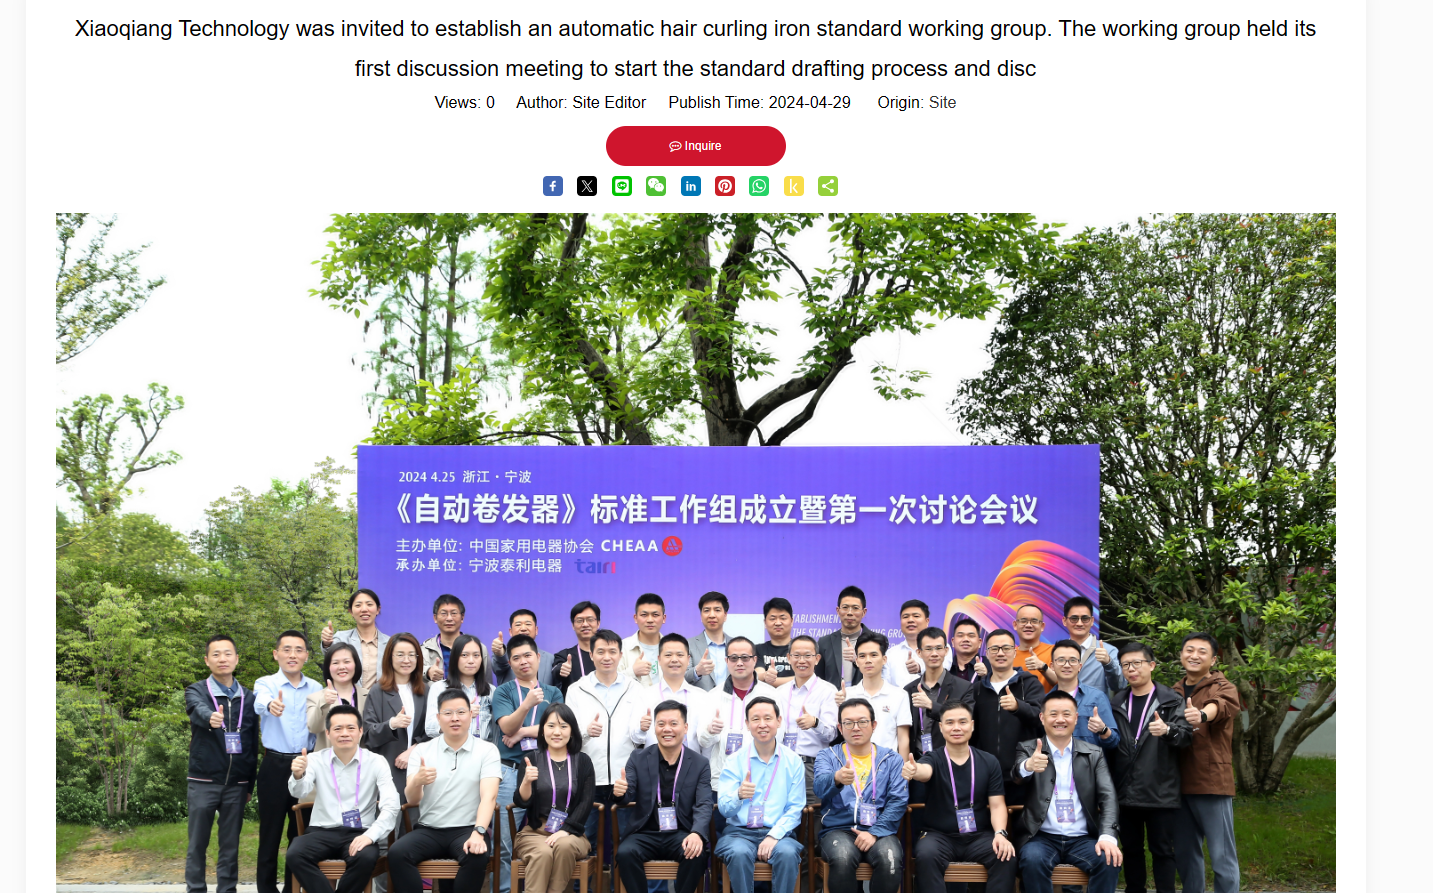 Xiaoqiang Technology was invited to establish a standard working group for automatic hair curlers